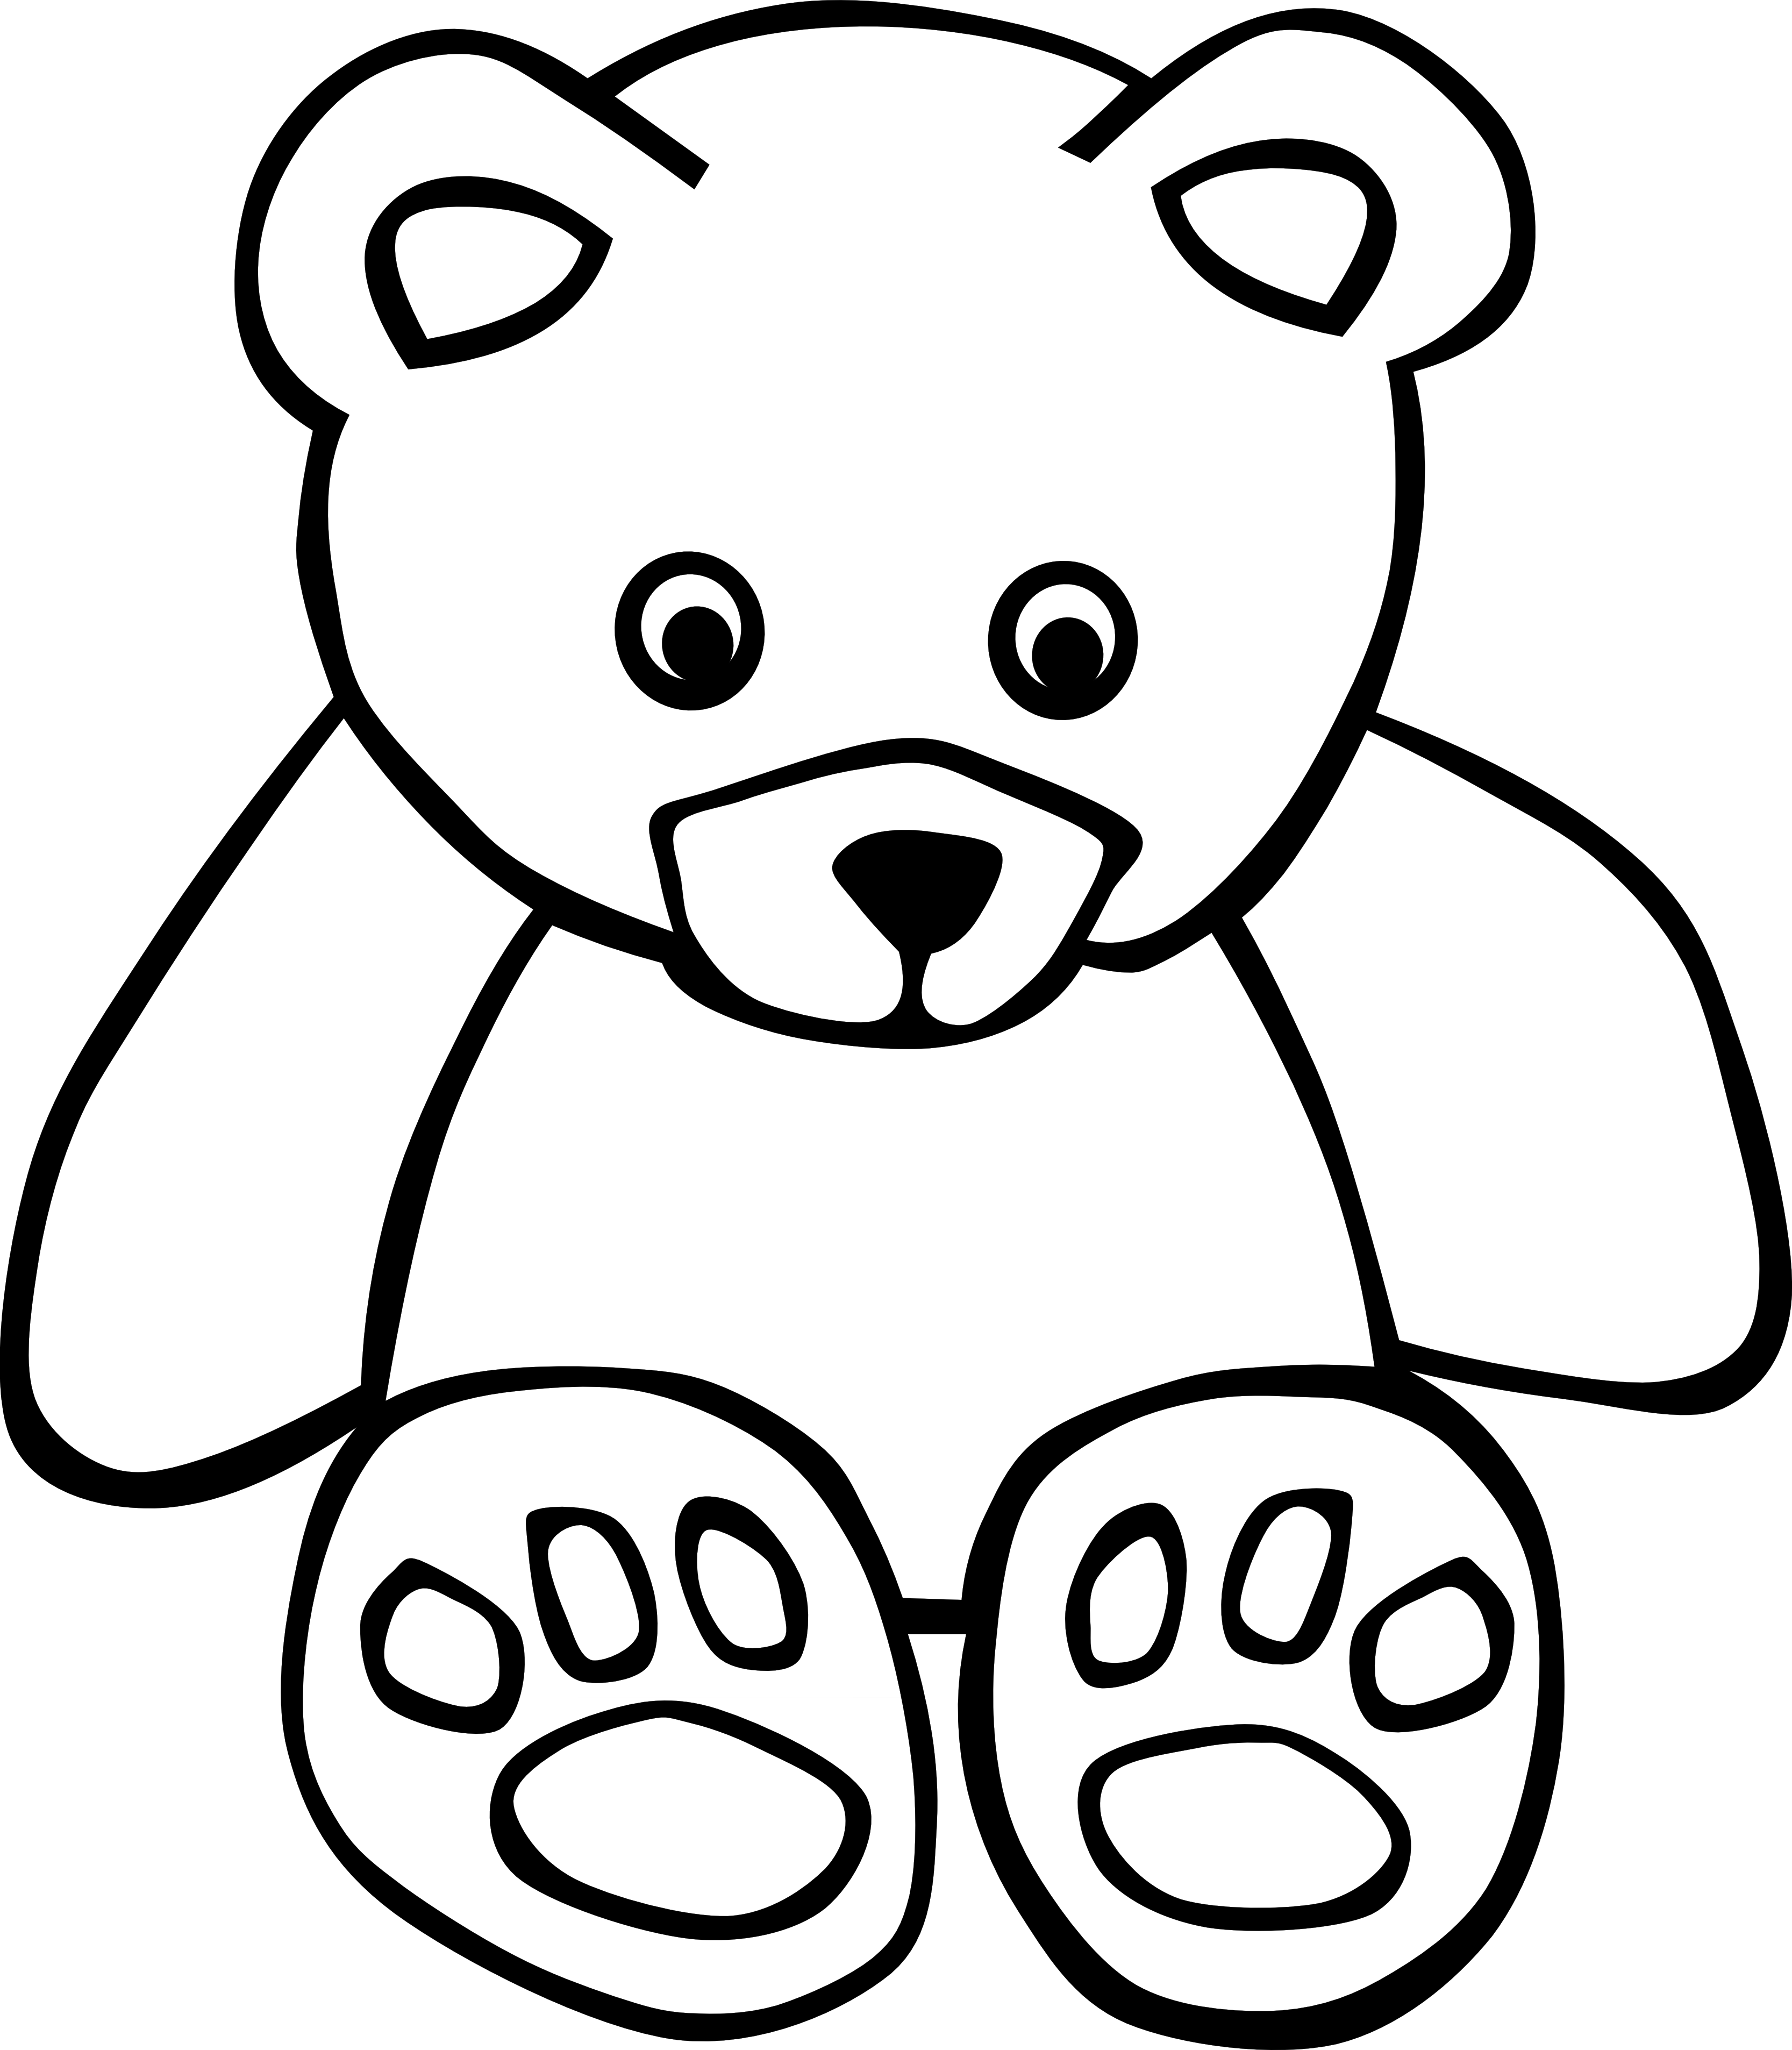 Teddy Bear Black And White Clip Art - Clipart library